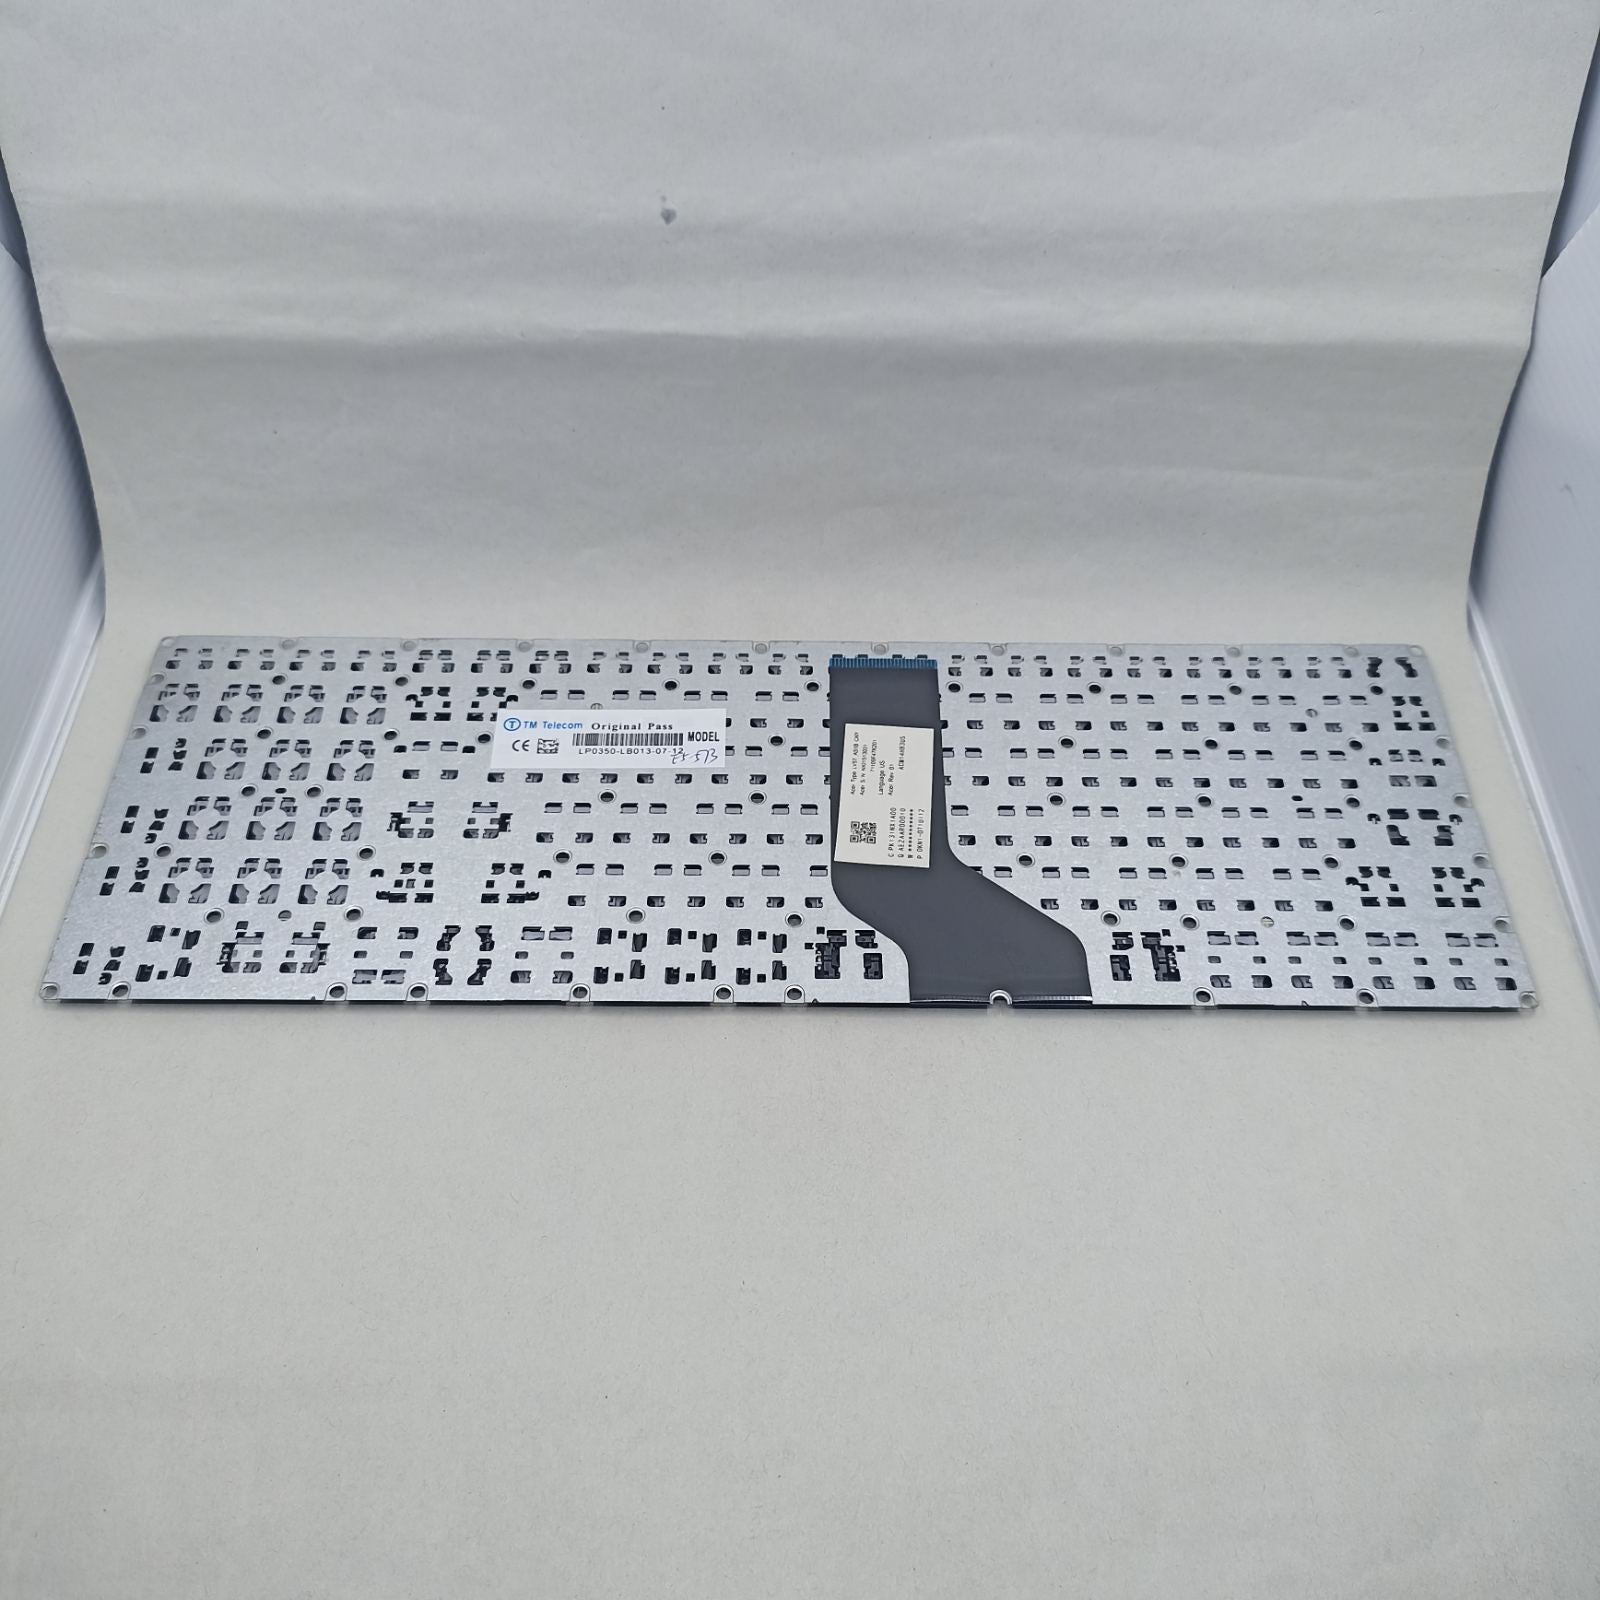 Replacement Keyboard Keys for Acer A315-51 A1